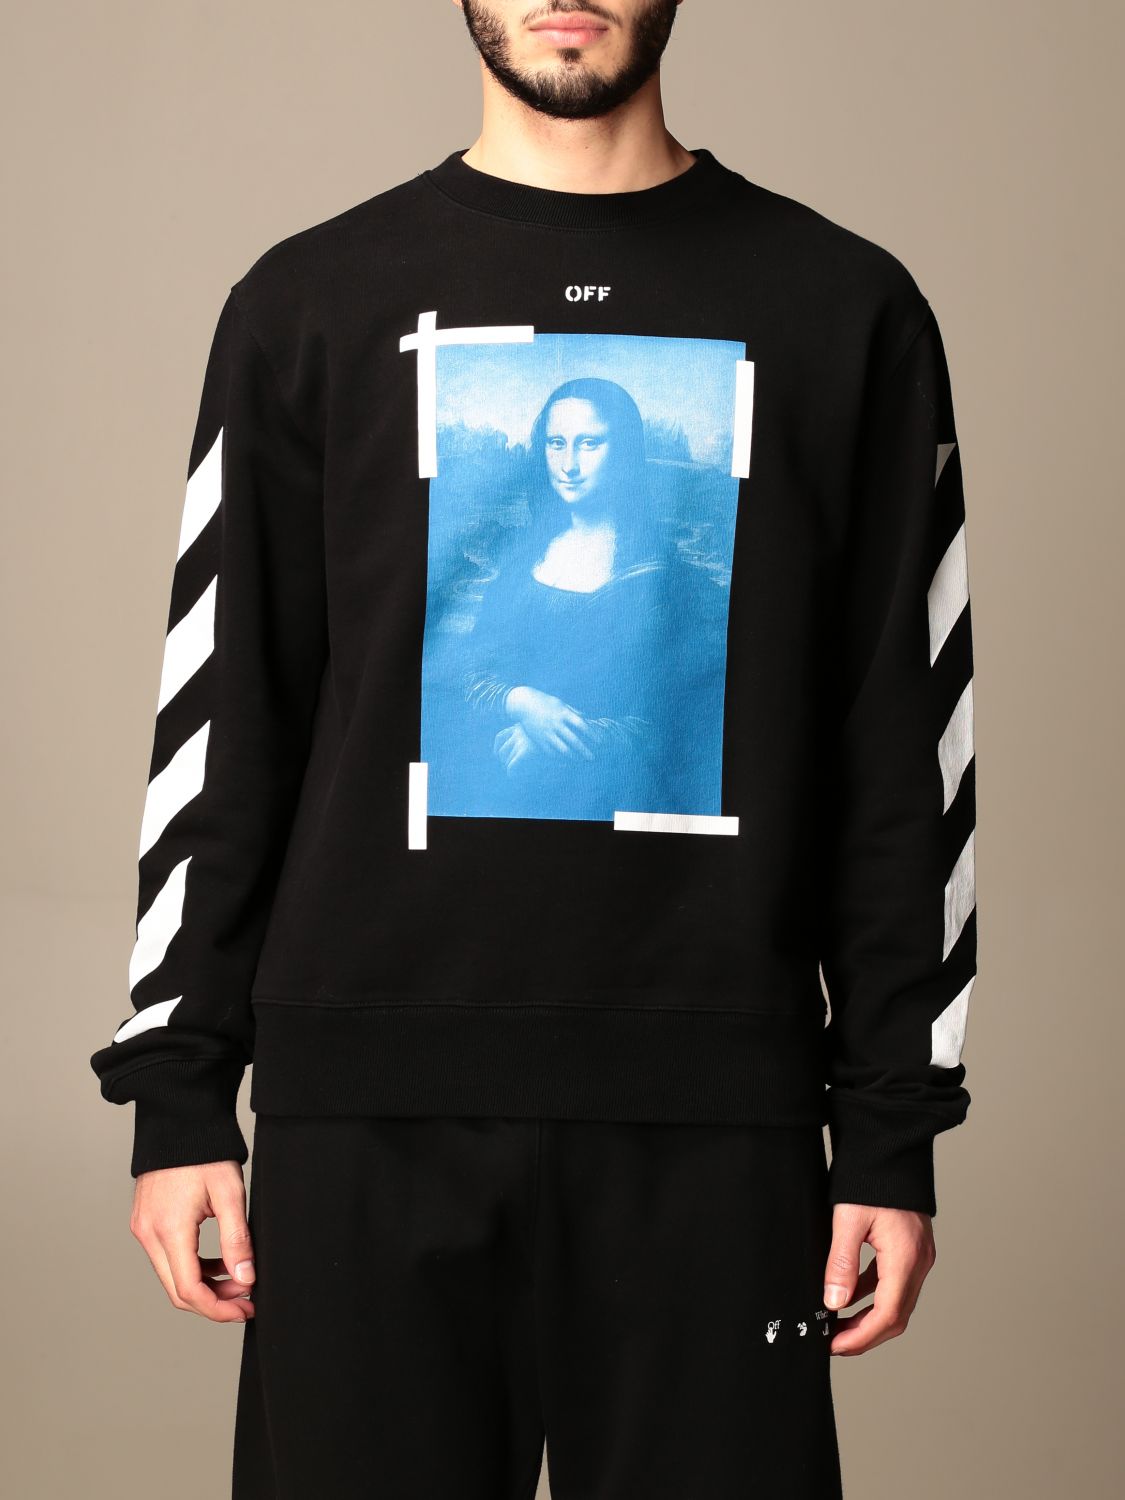 online Off OMBA025R21FLE003 Black Off-White sweatshirt cotton OFF-WHITE: White at crewneck | in print with - sweatshirt